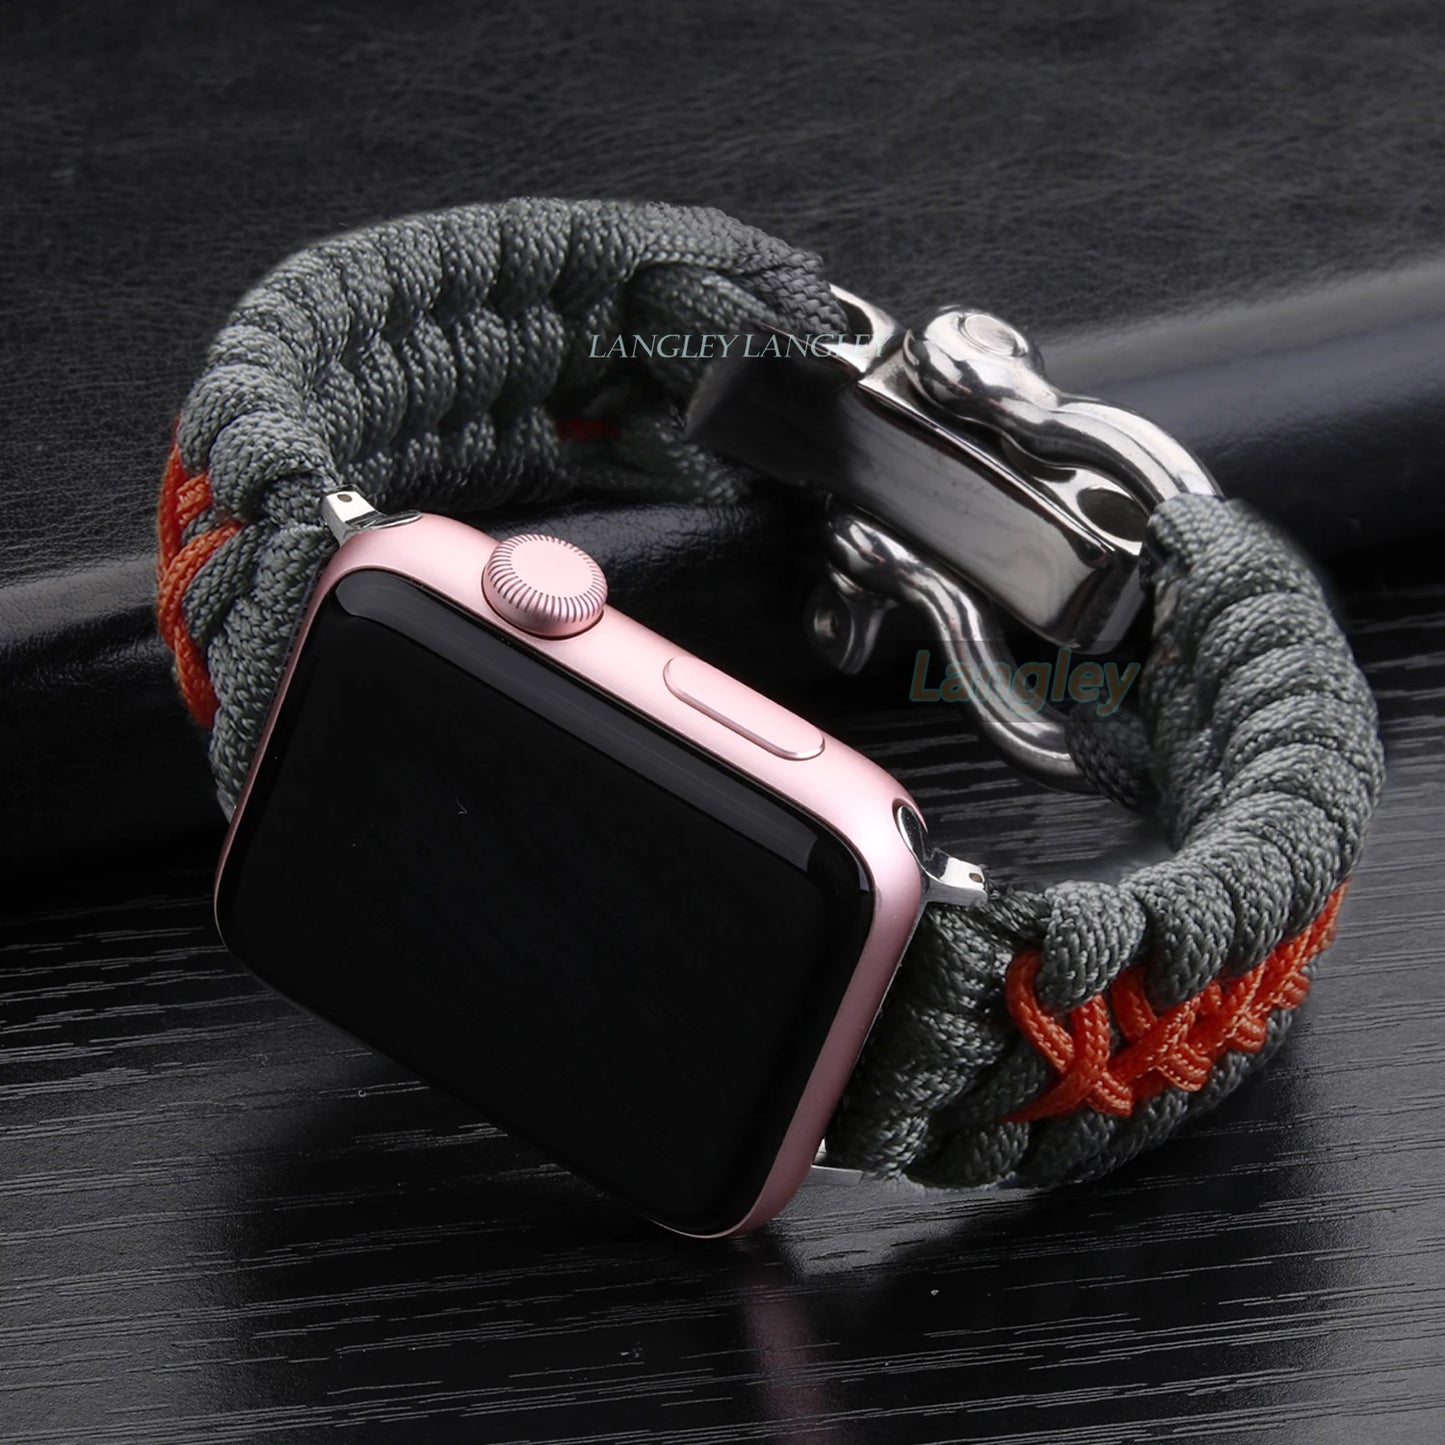 Braided Nylon Bracelet for Apple Watch with Adjustable Buckle (M 165mm - 170mm - 175mm)